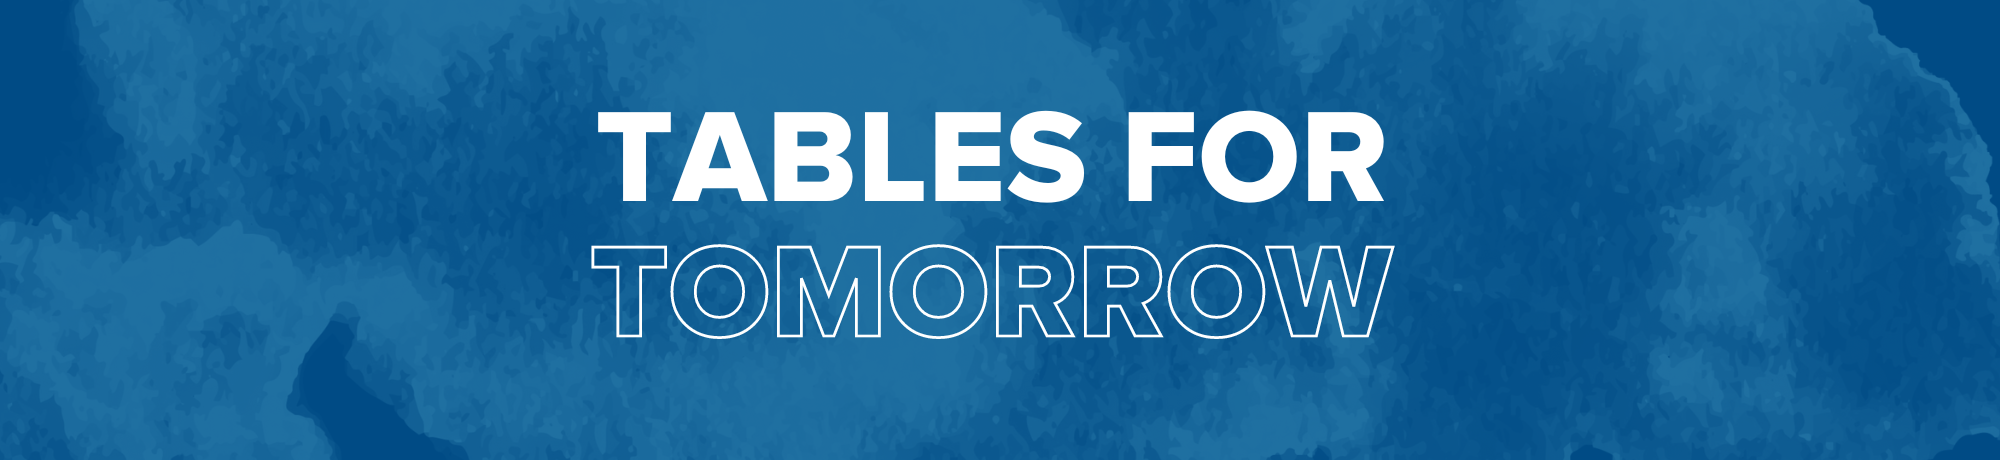 Blue background with white text that reads Tables for Tomorrow